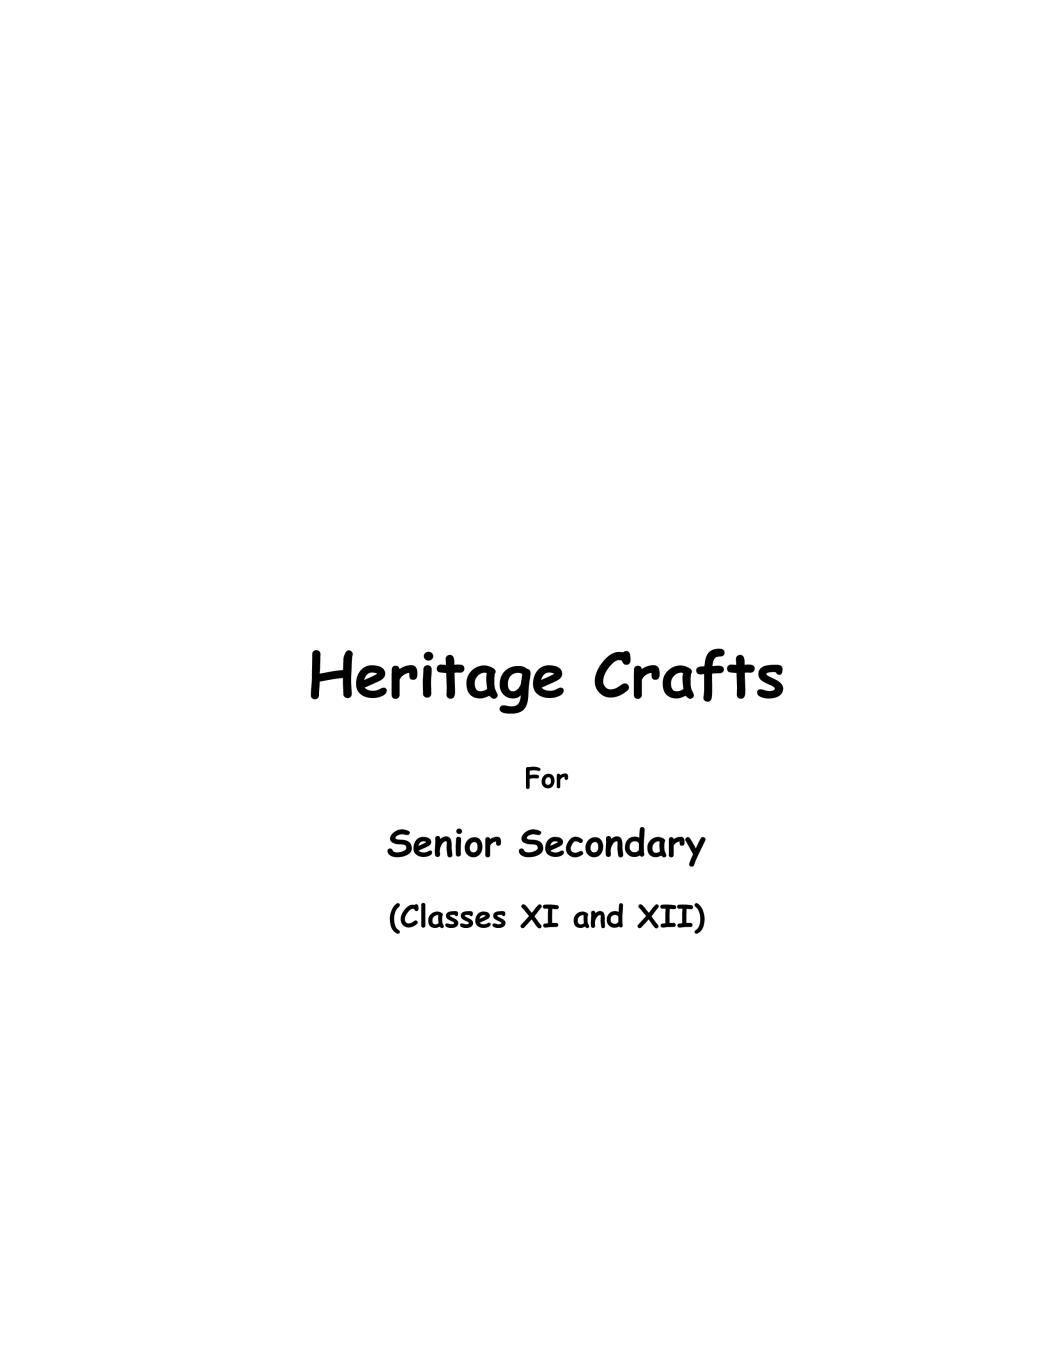 NCERT Class 11 Syllabus for Heritage Craft - Page 1